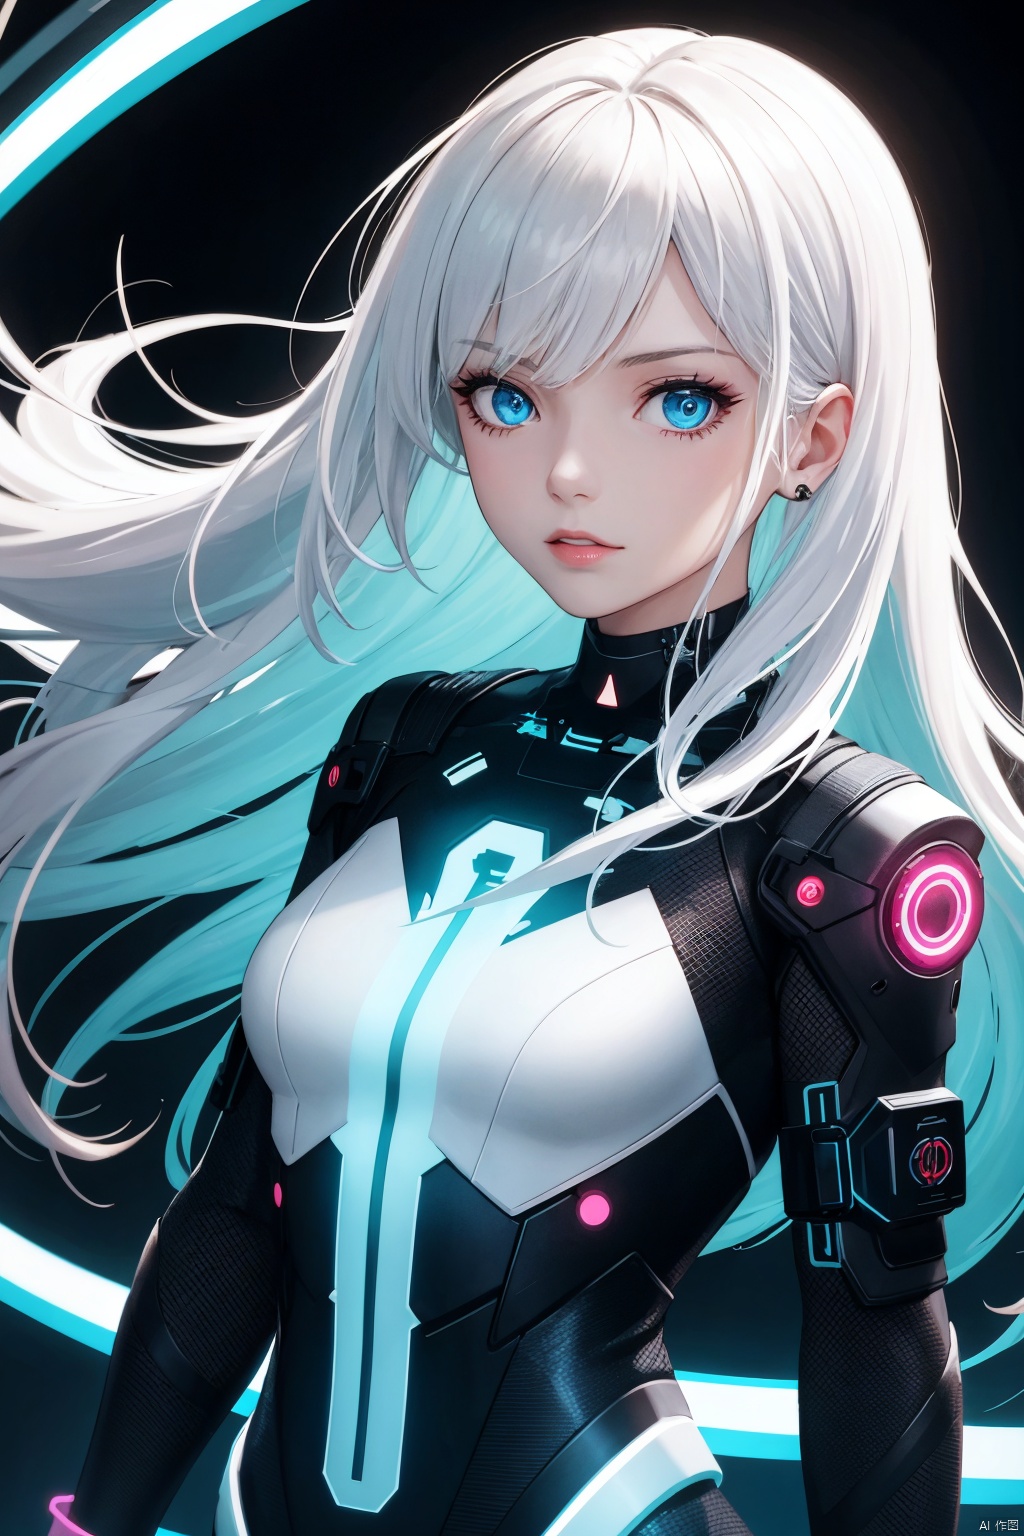  1girl, long hair, bangs, blue eyes, white hair, floating hair,Cyberpunk Vector Art, A mysterious girl with a tech-inspired outfit, Background ofwoven cables and glowing digital codes, Top-down angle, Sharp lines, neon colors, metallic textures